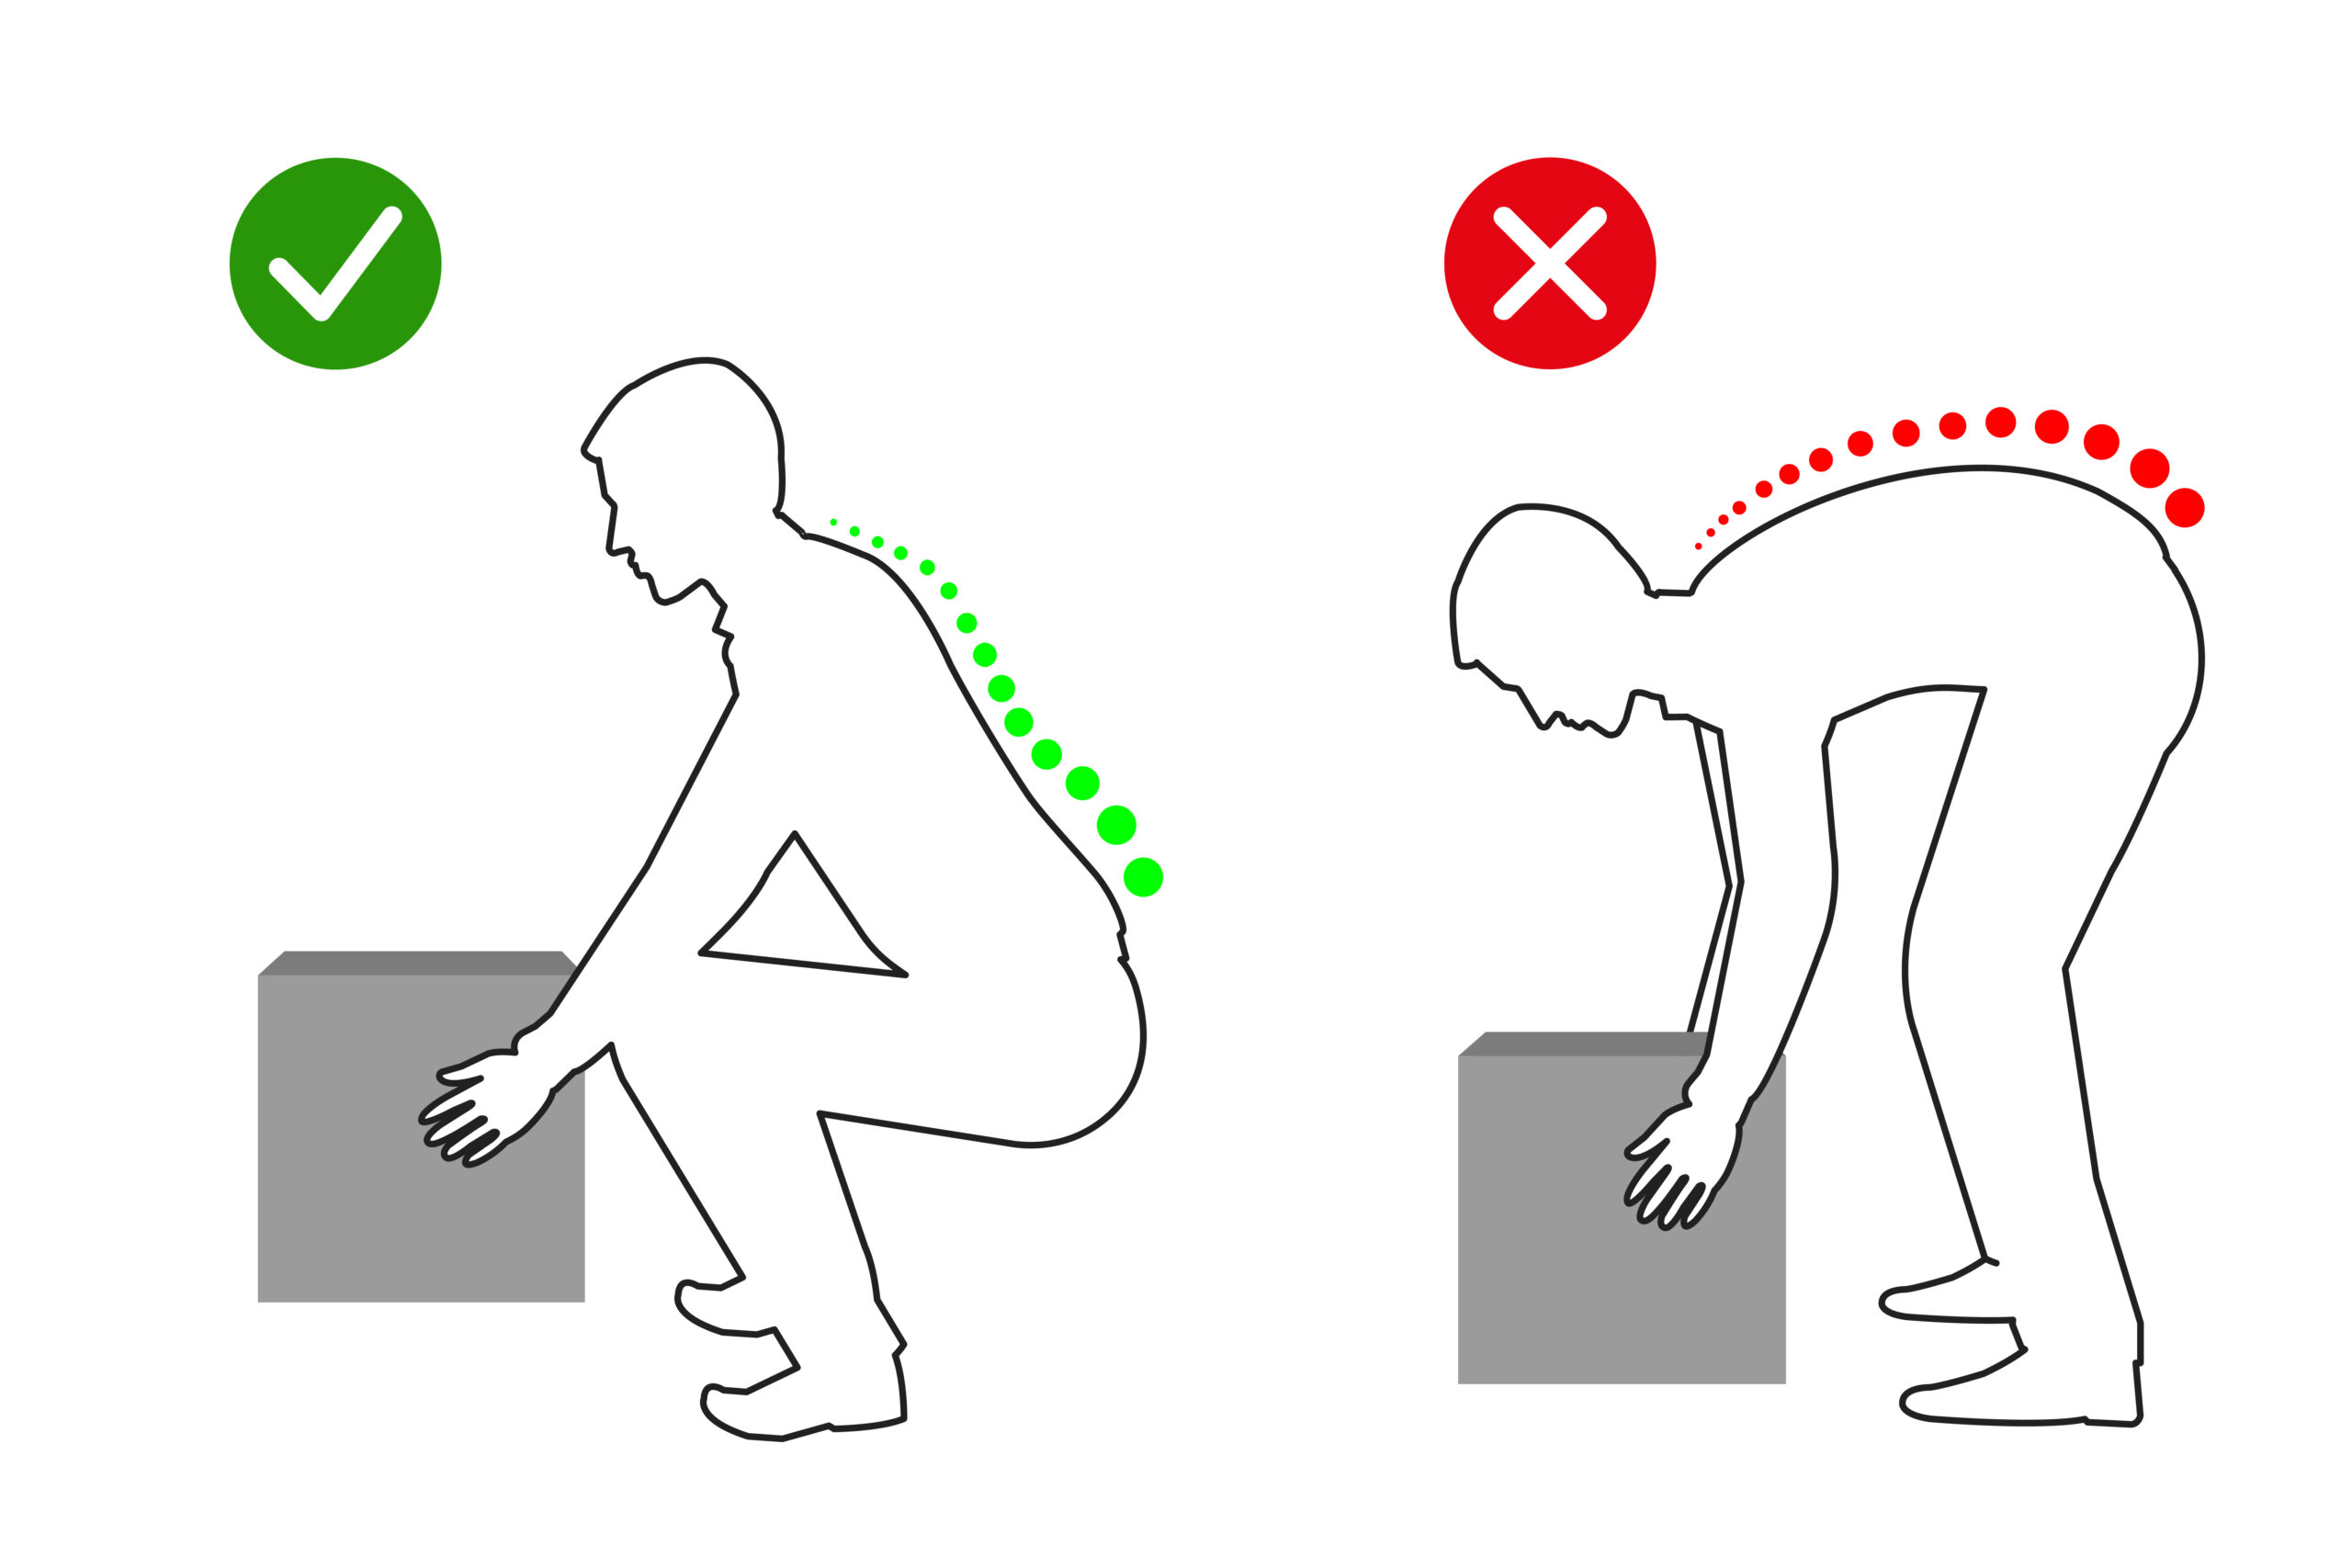 An illustration of the correct lifting form to help sciatica pain relief.